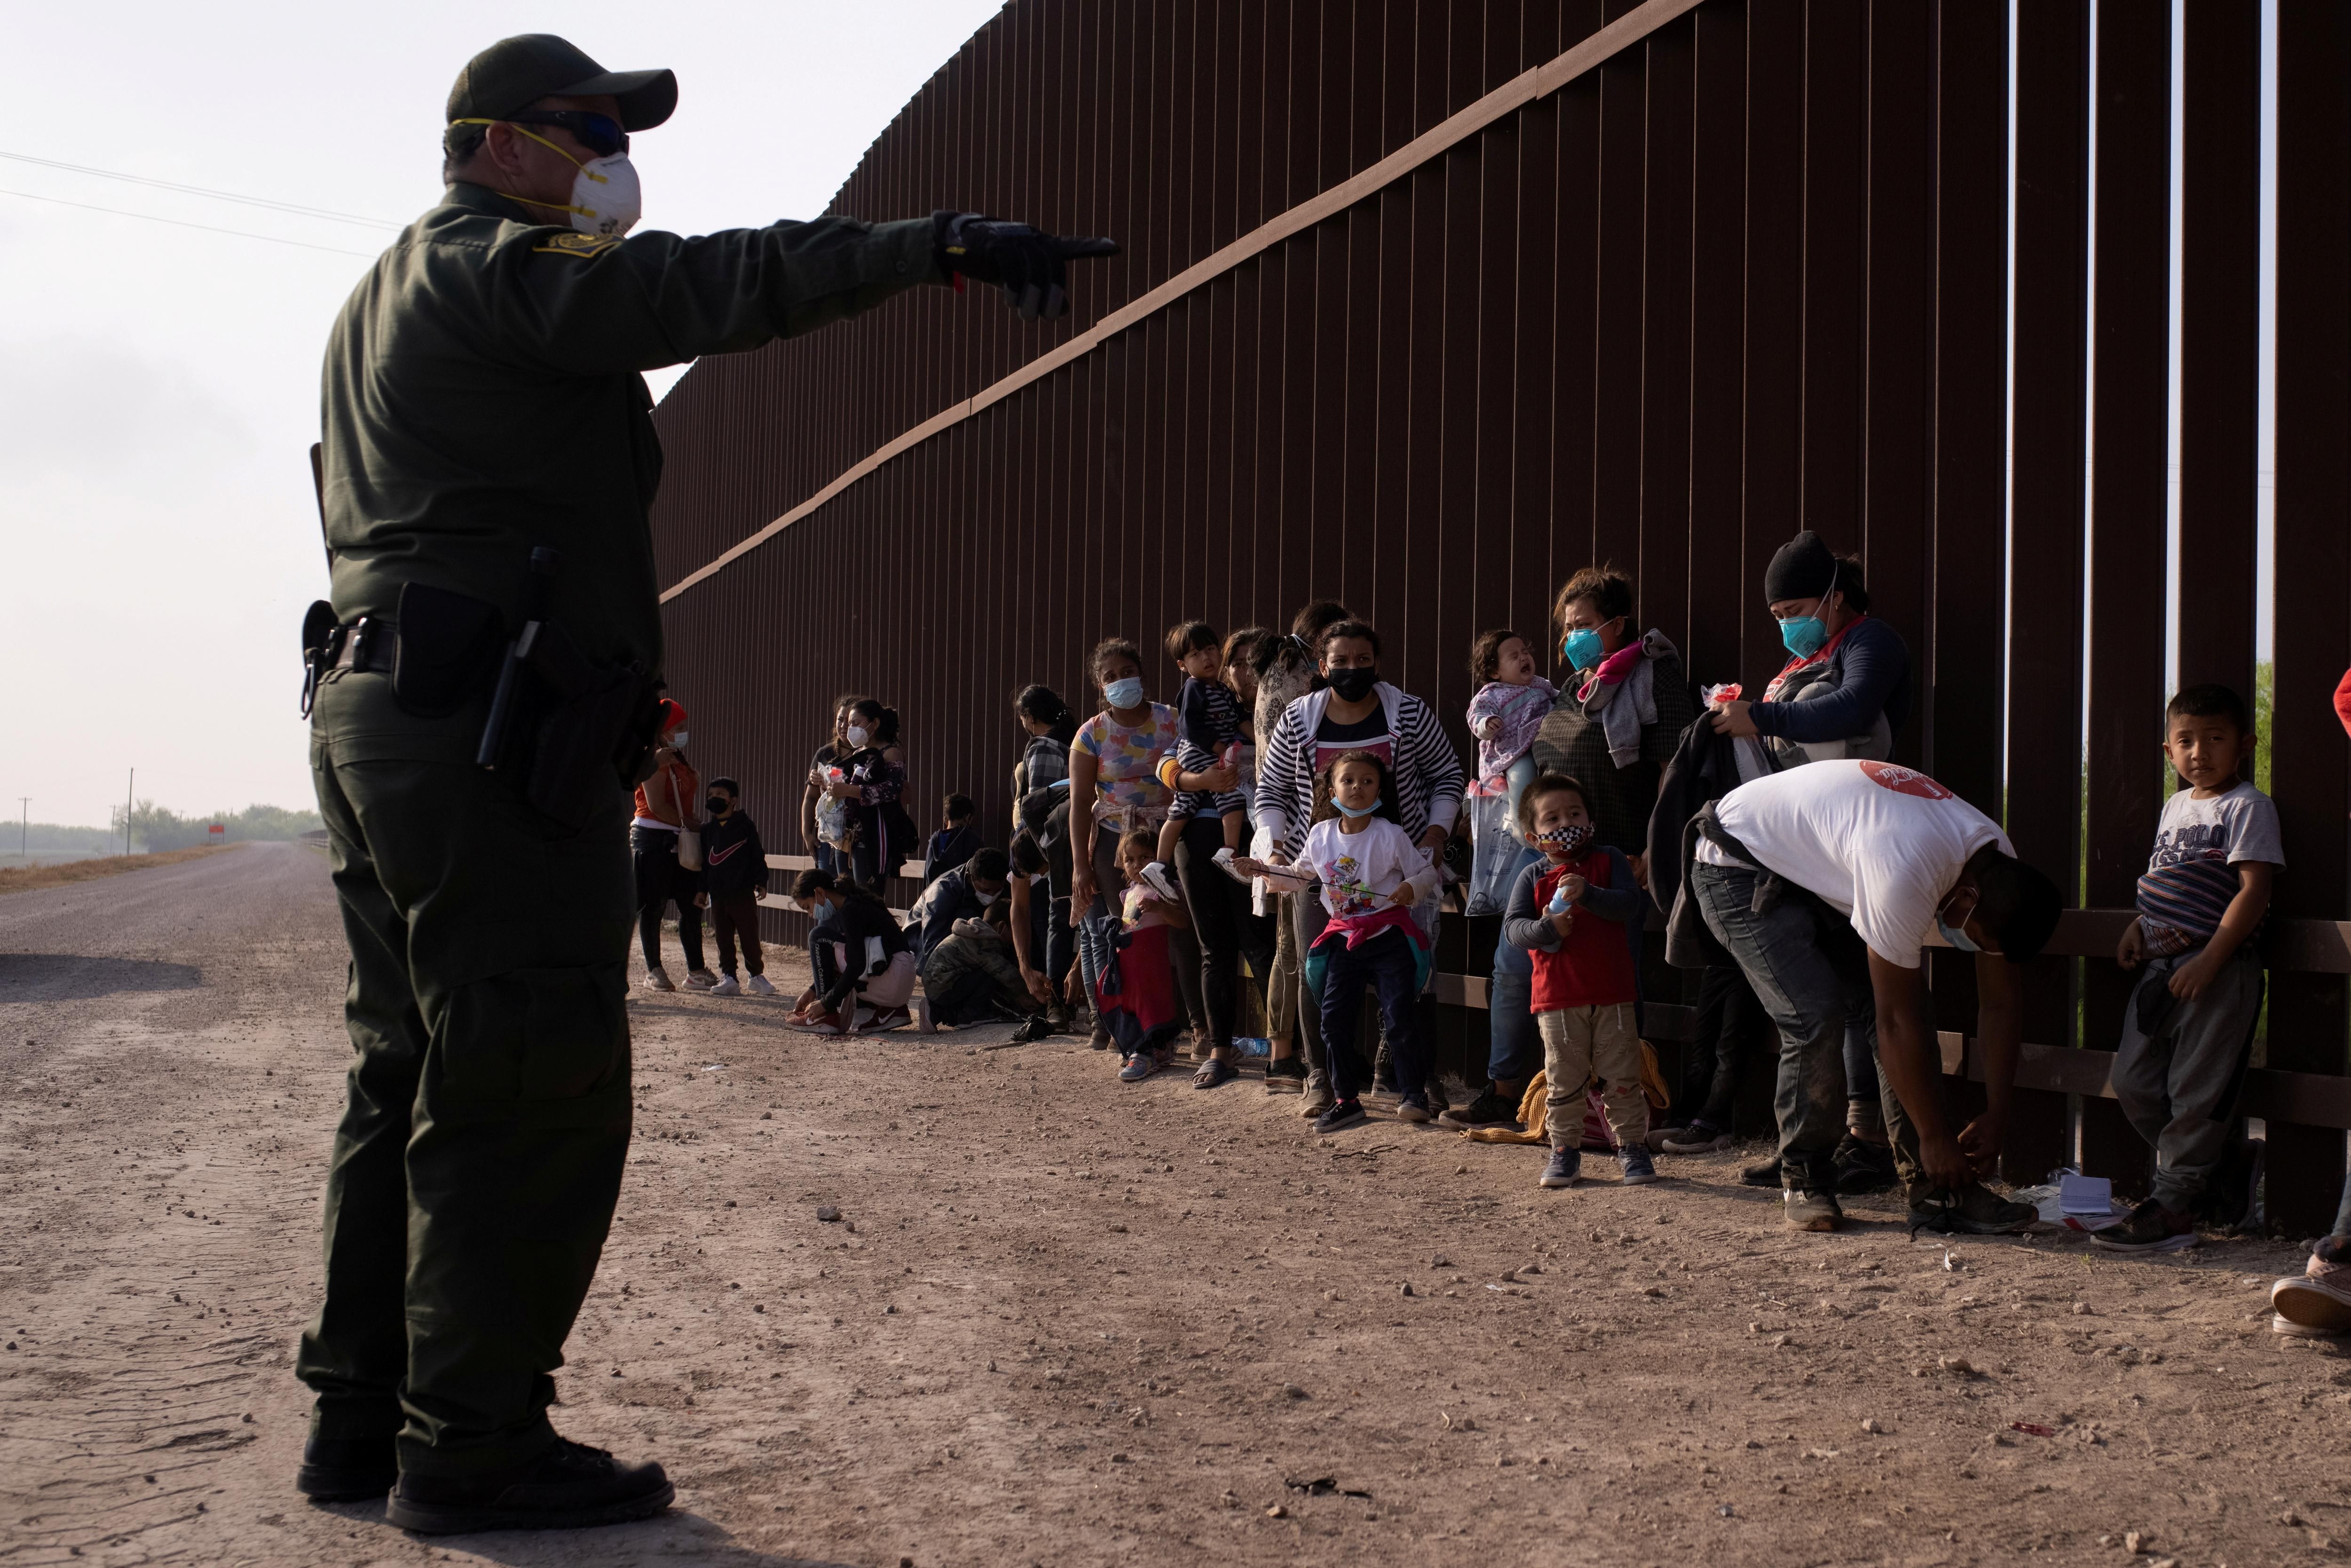 A U.S. Border Patrol agent instructs asylum-seeking migrants as they line up along the border wall after crossing the Rio Grande river into the United States from Mexico on a raft, in Penitas, Texas, U.S., March 17, 2021. 